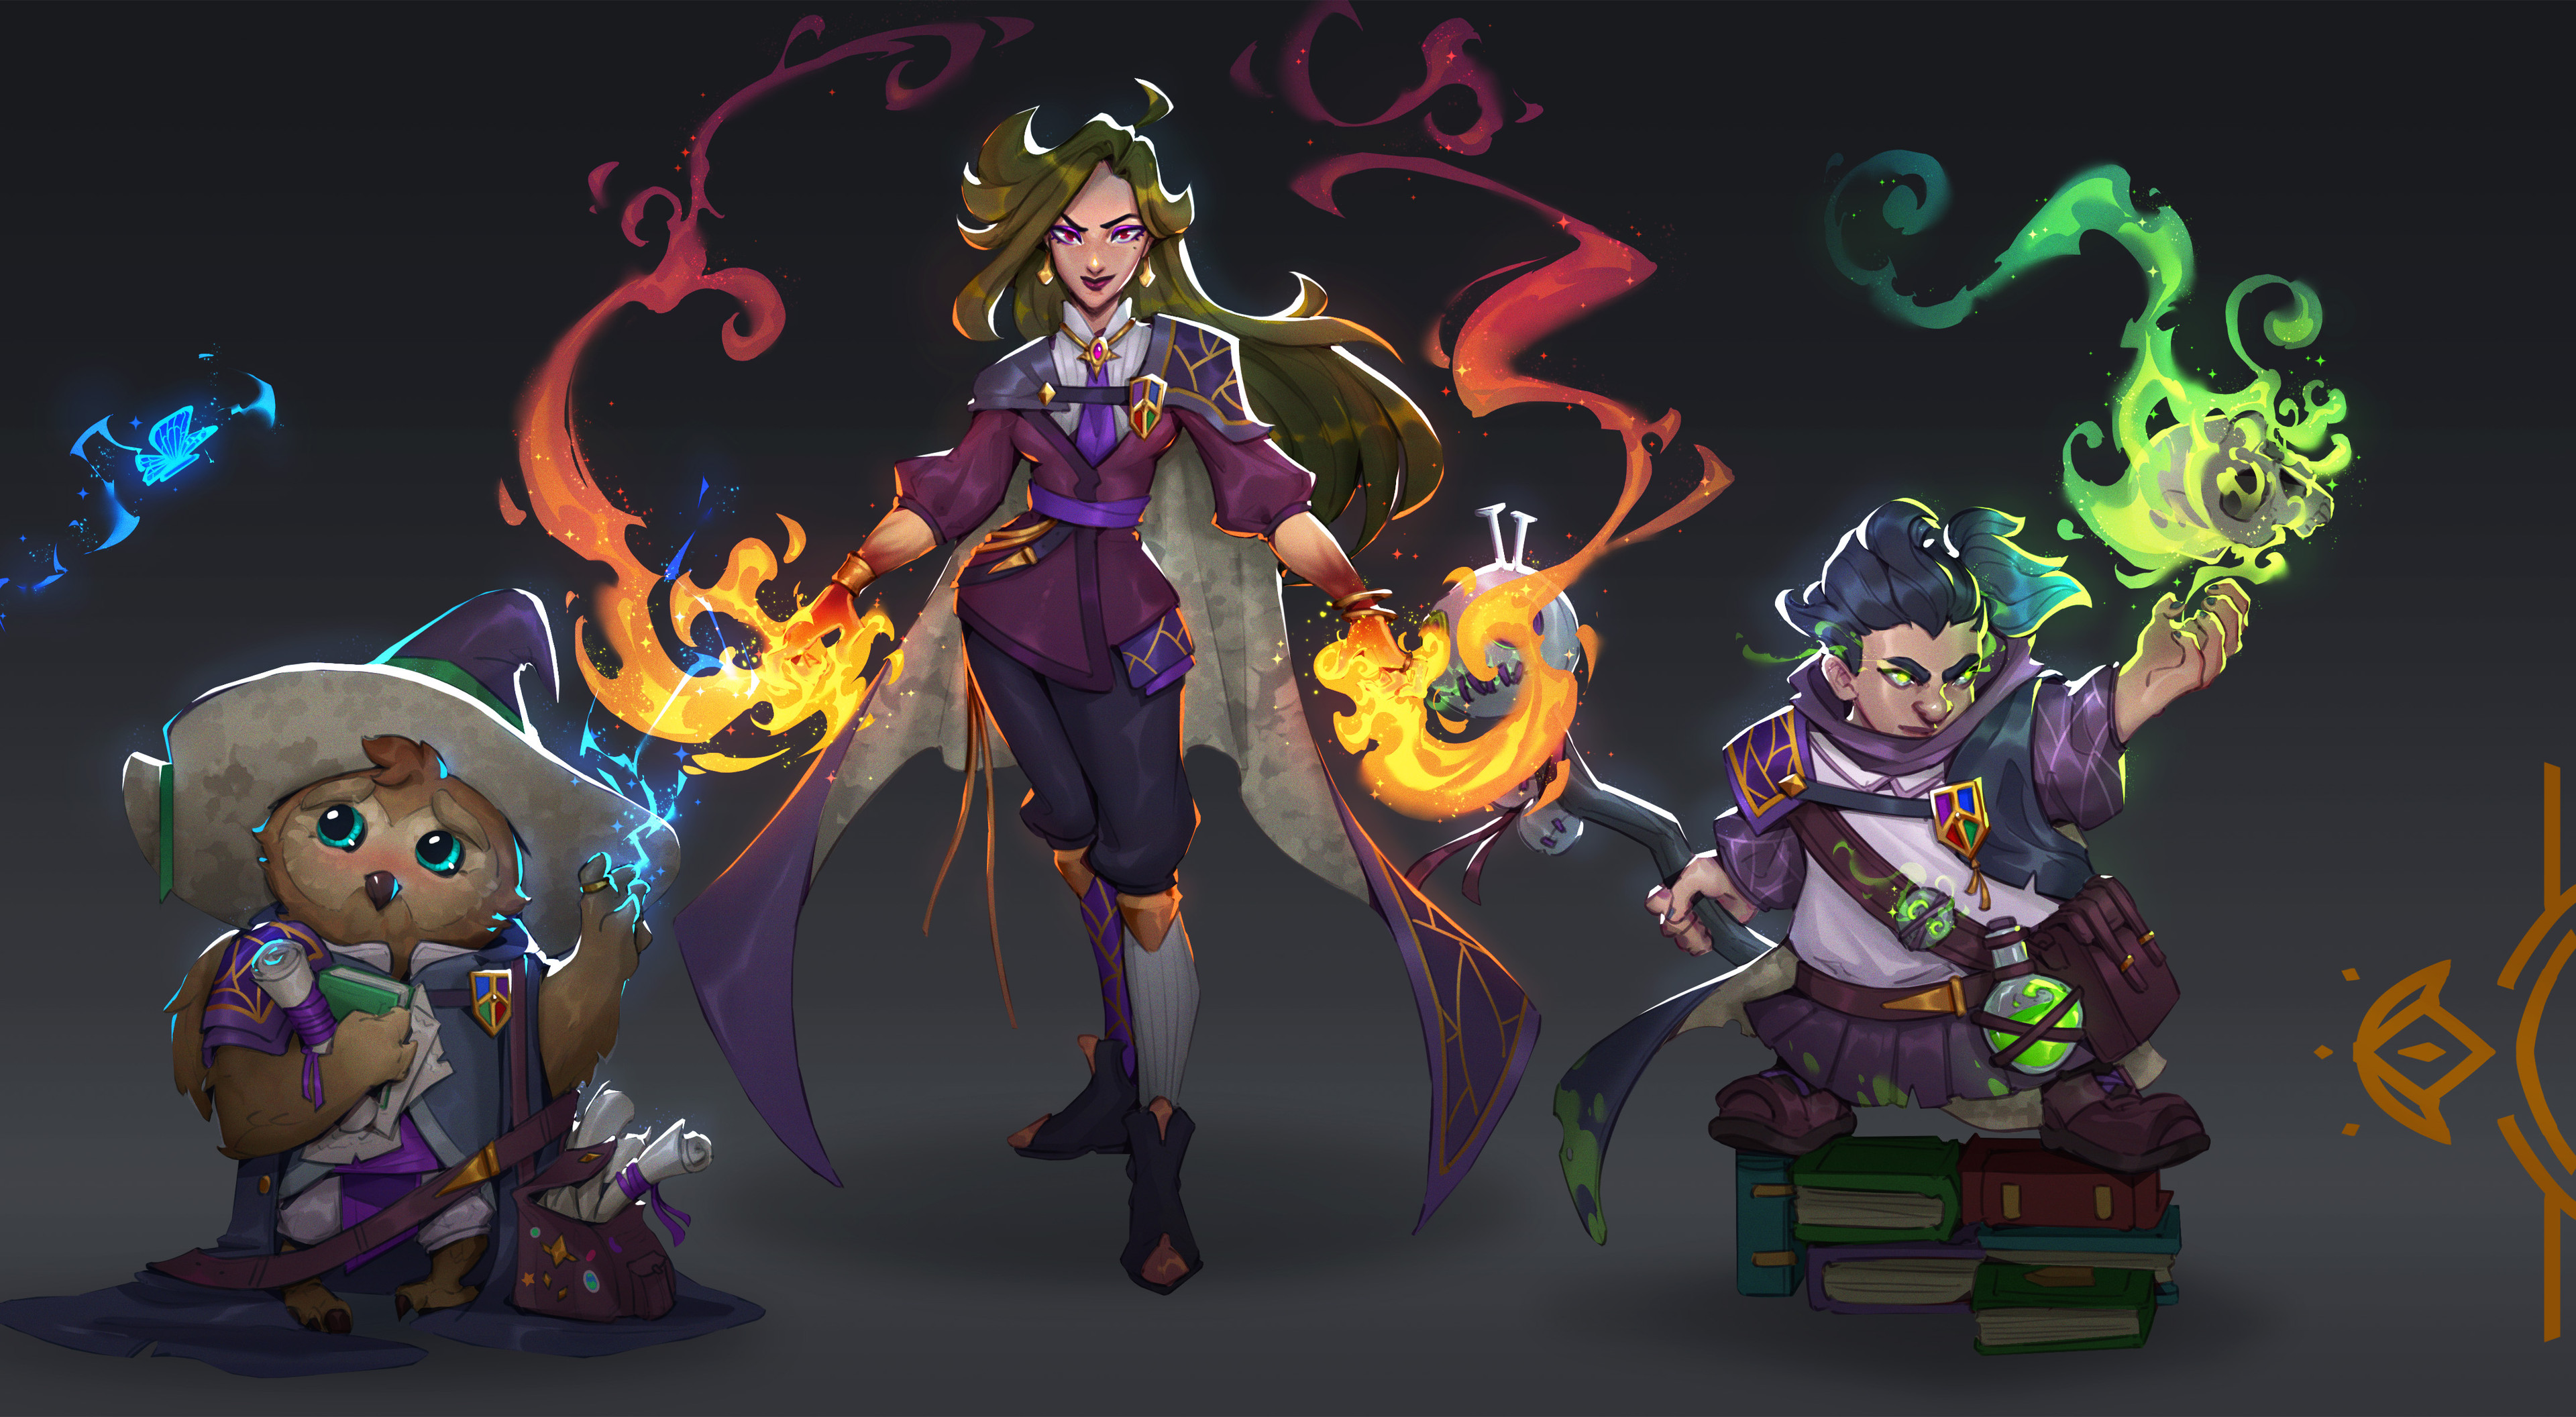 House ARCANE: Wizard, Sorceress, Warlock (Left to Right)